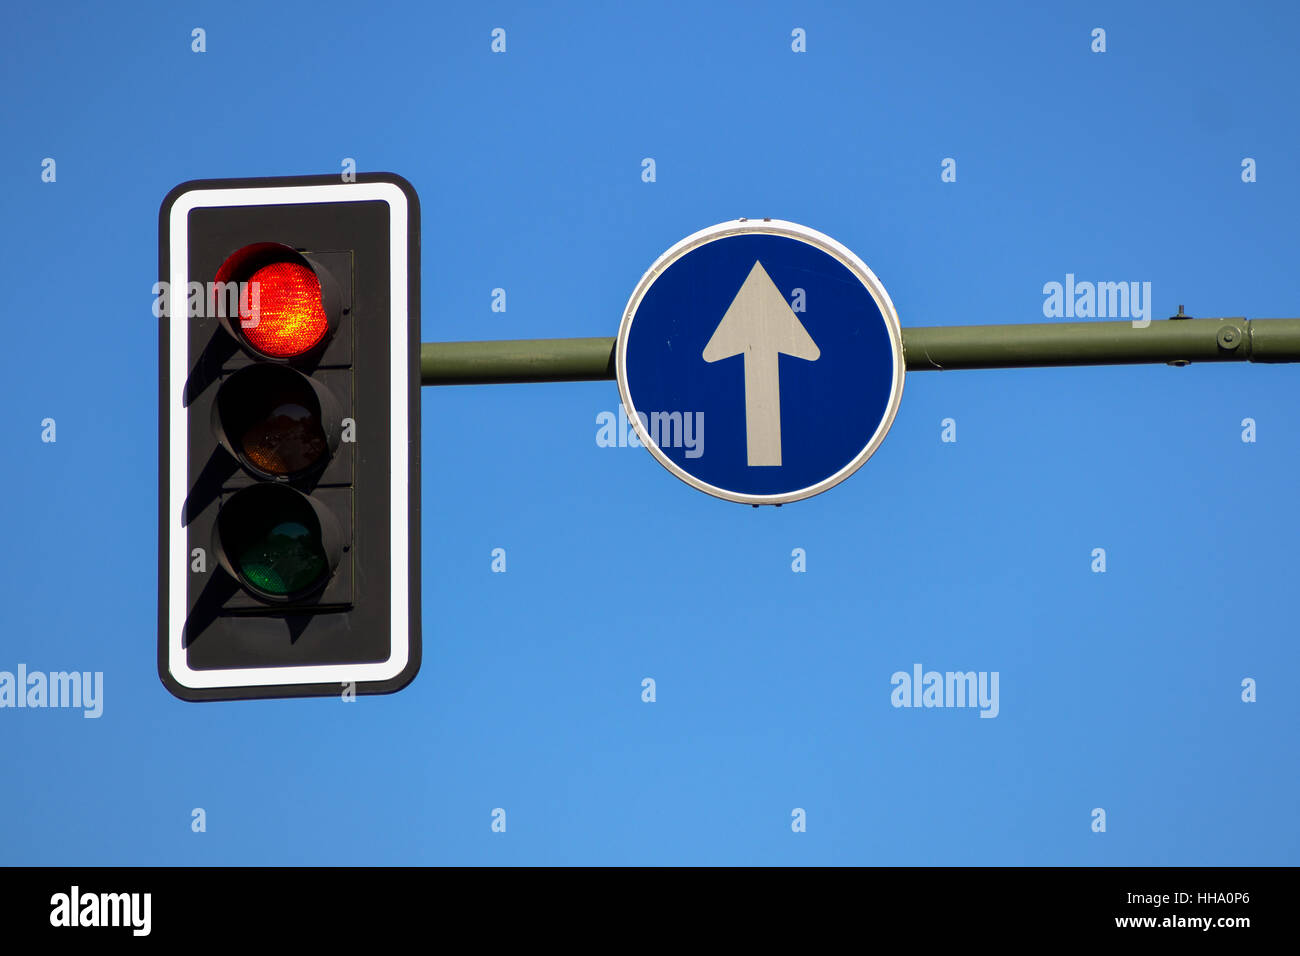 Traffic light in red and direction sign on blue sky background Stock Photo